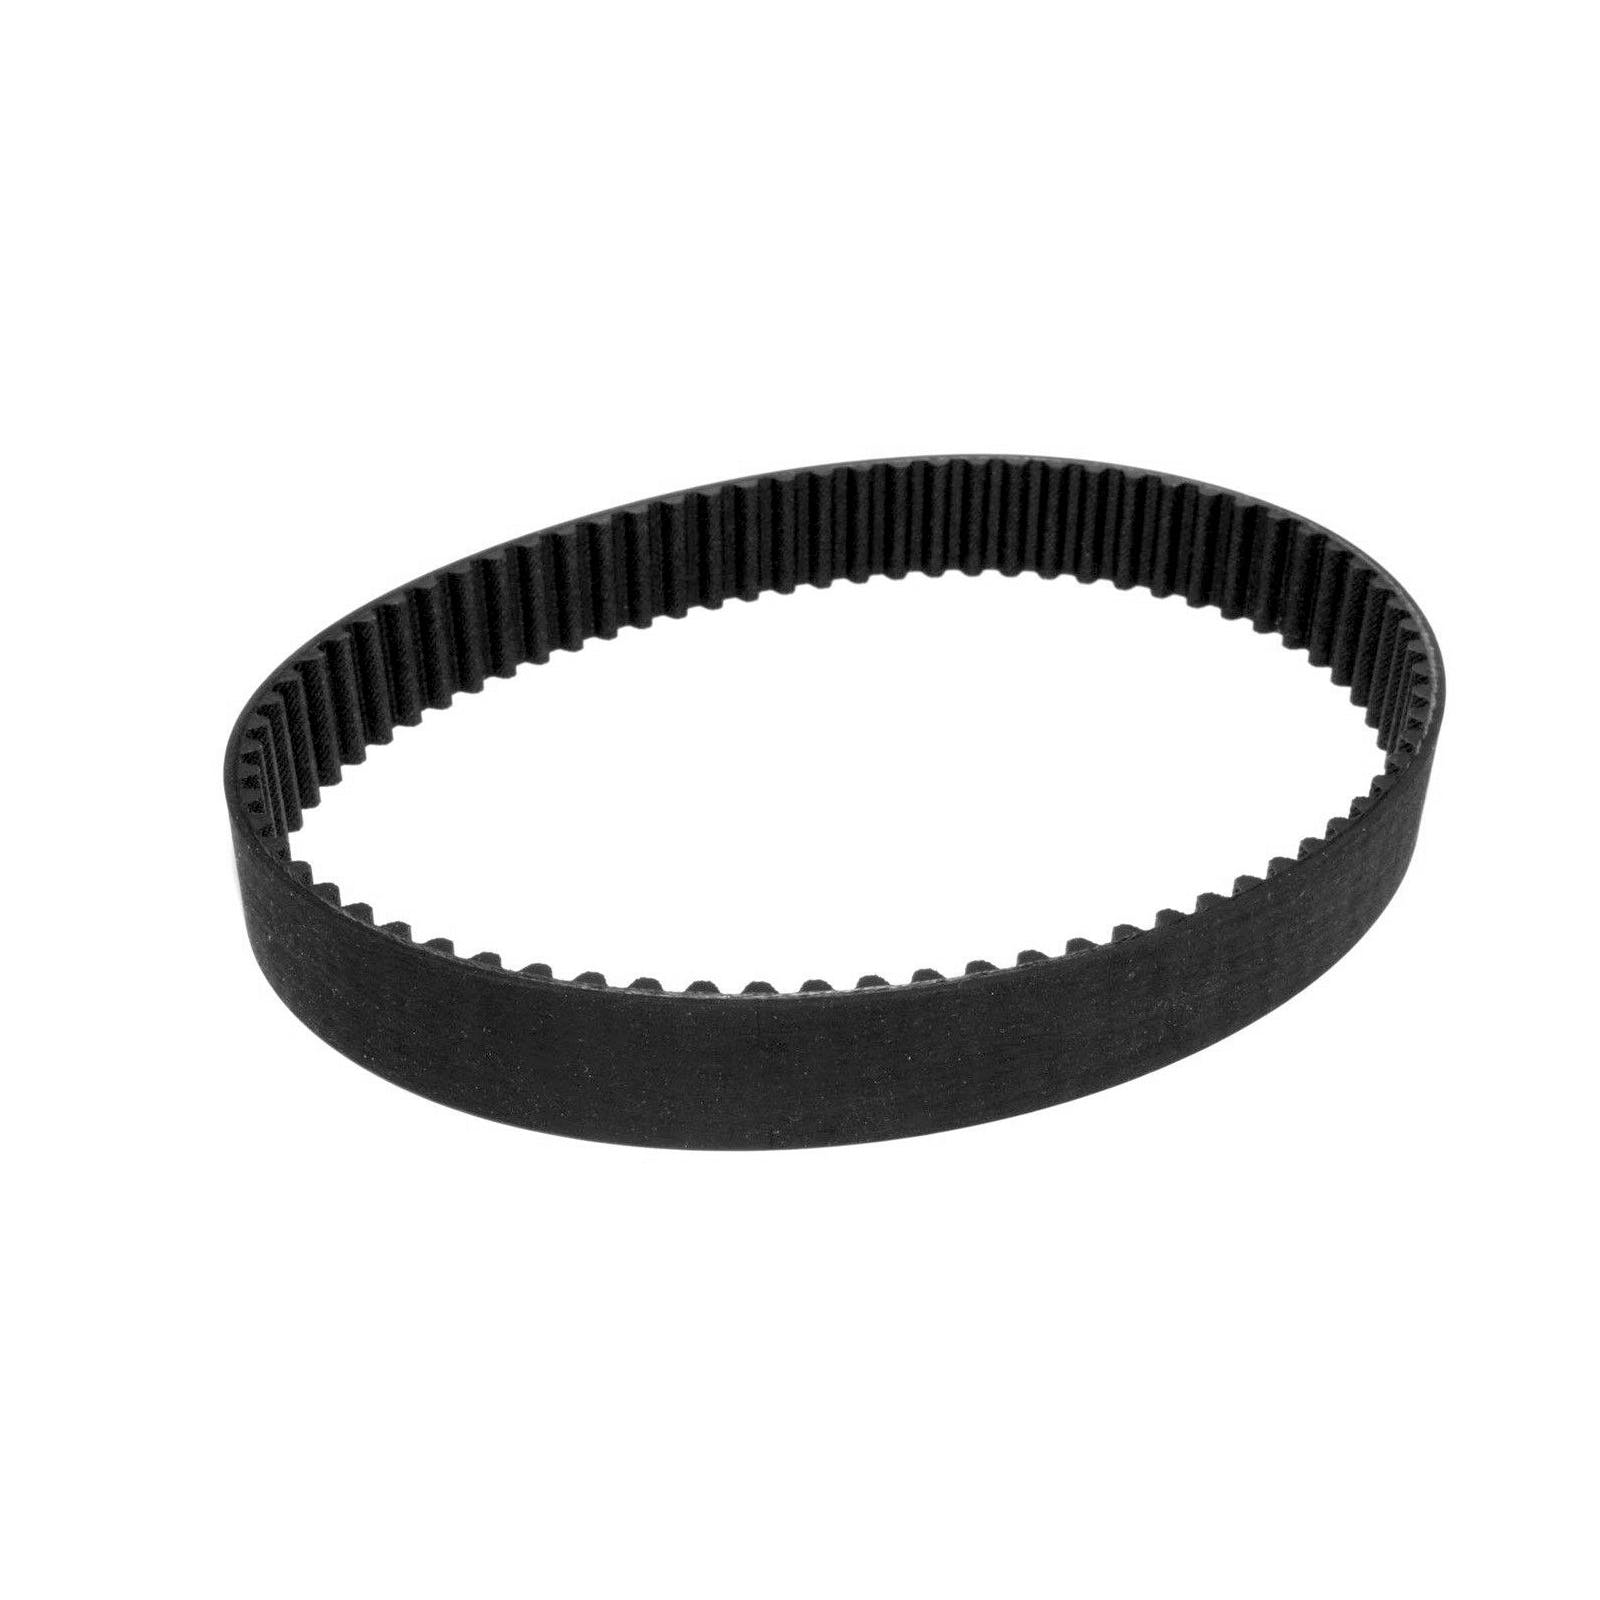 Speedmaster PCE629.1006 79-Tooth 21.75 mm X 629.0mm Timing Belt Drive Replacement Belt